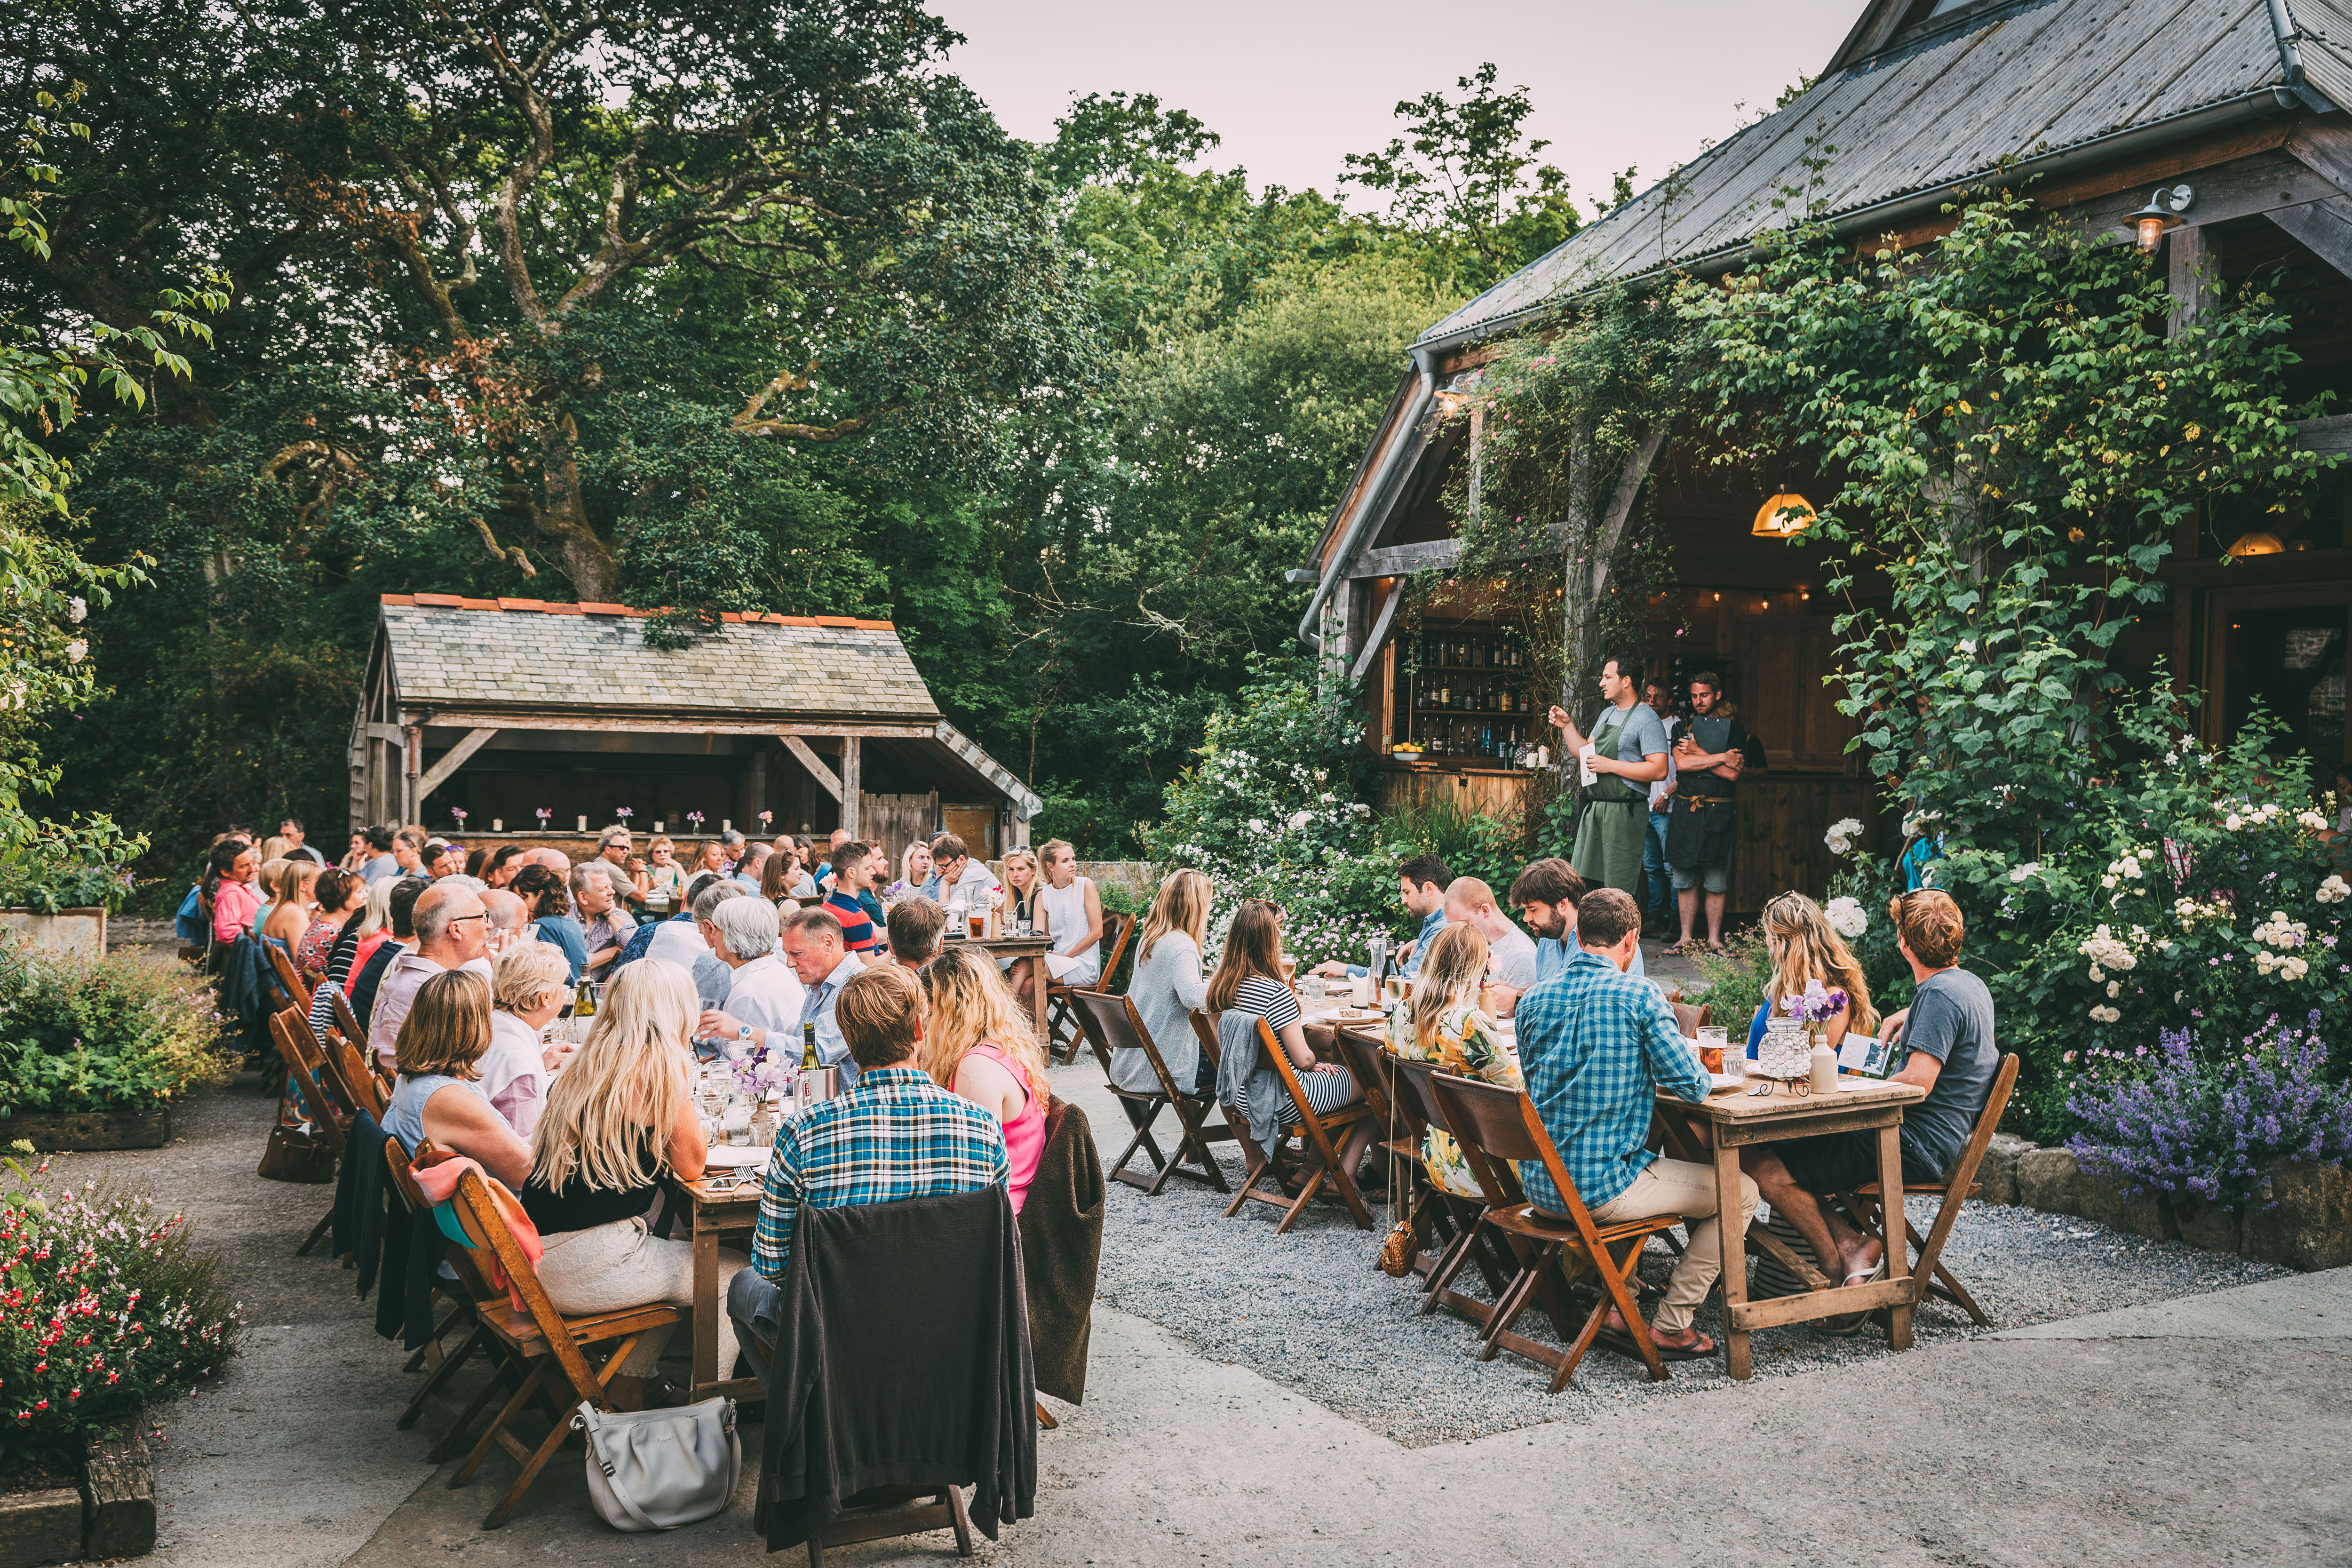 1000 Mouths will take place over four consecutive days from Thursday 5 to Sunday 8 October, with 12 feasts in total on Nancarrow Farm in Cornwall.